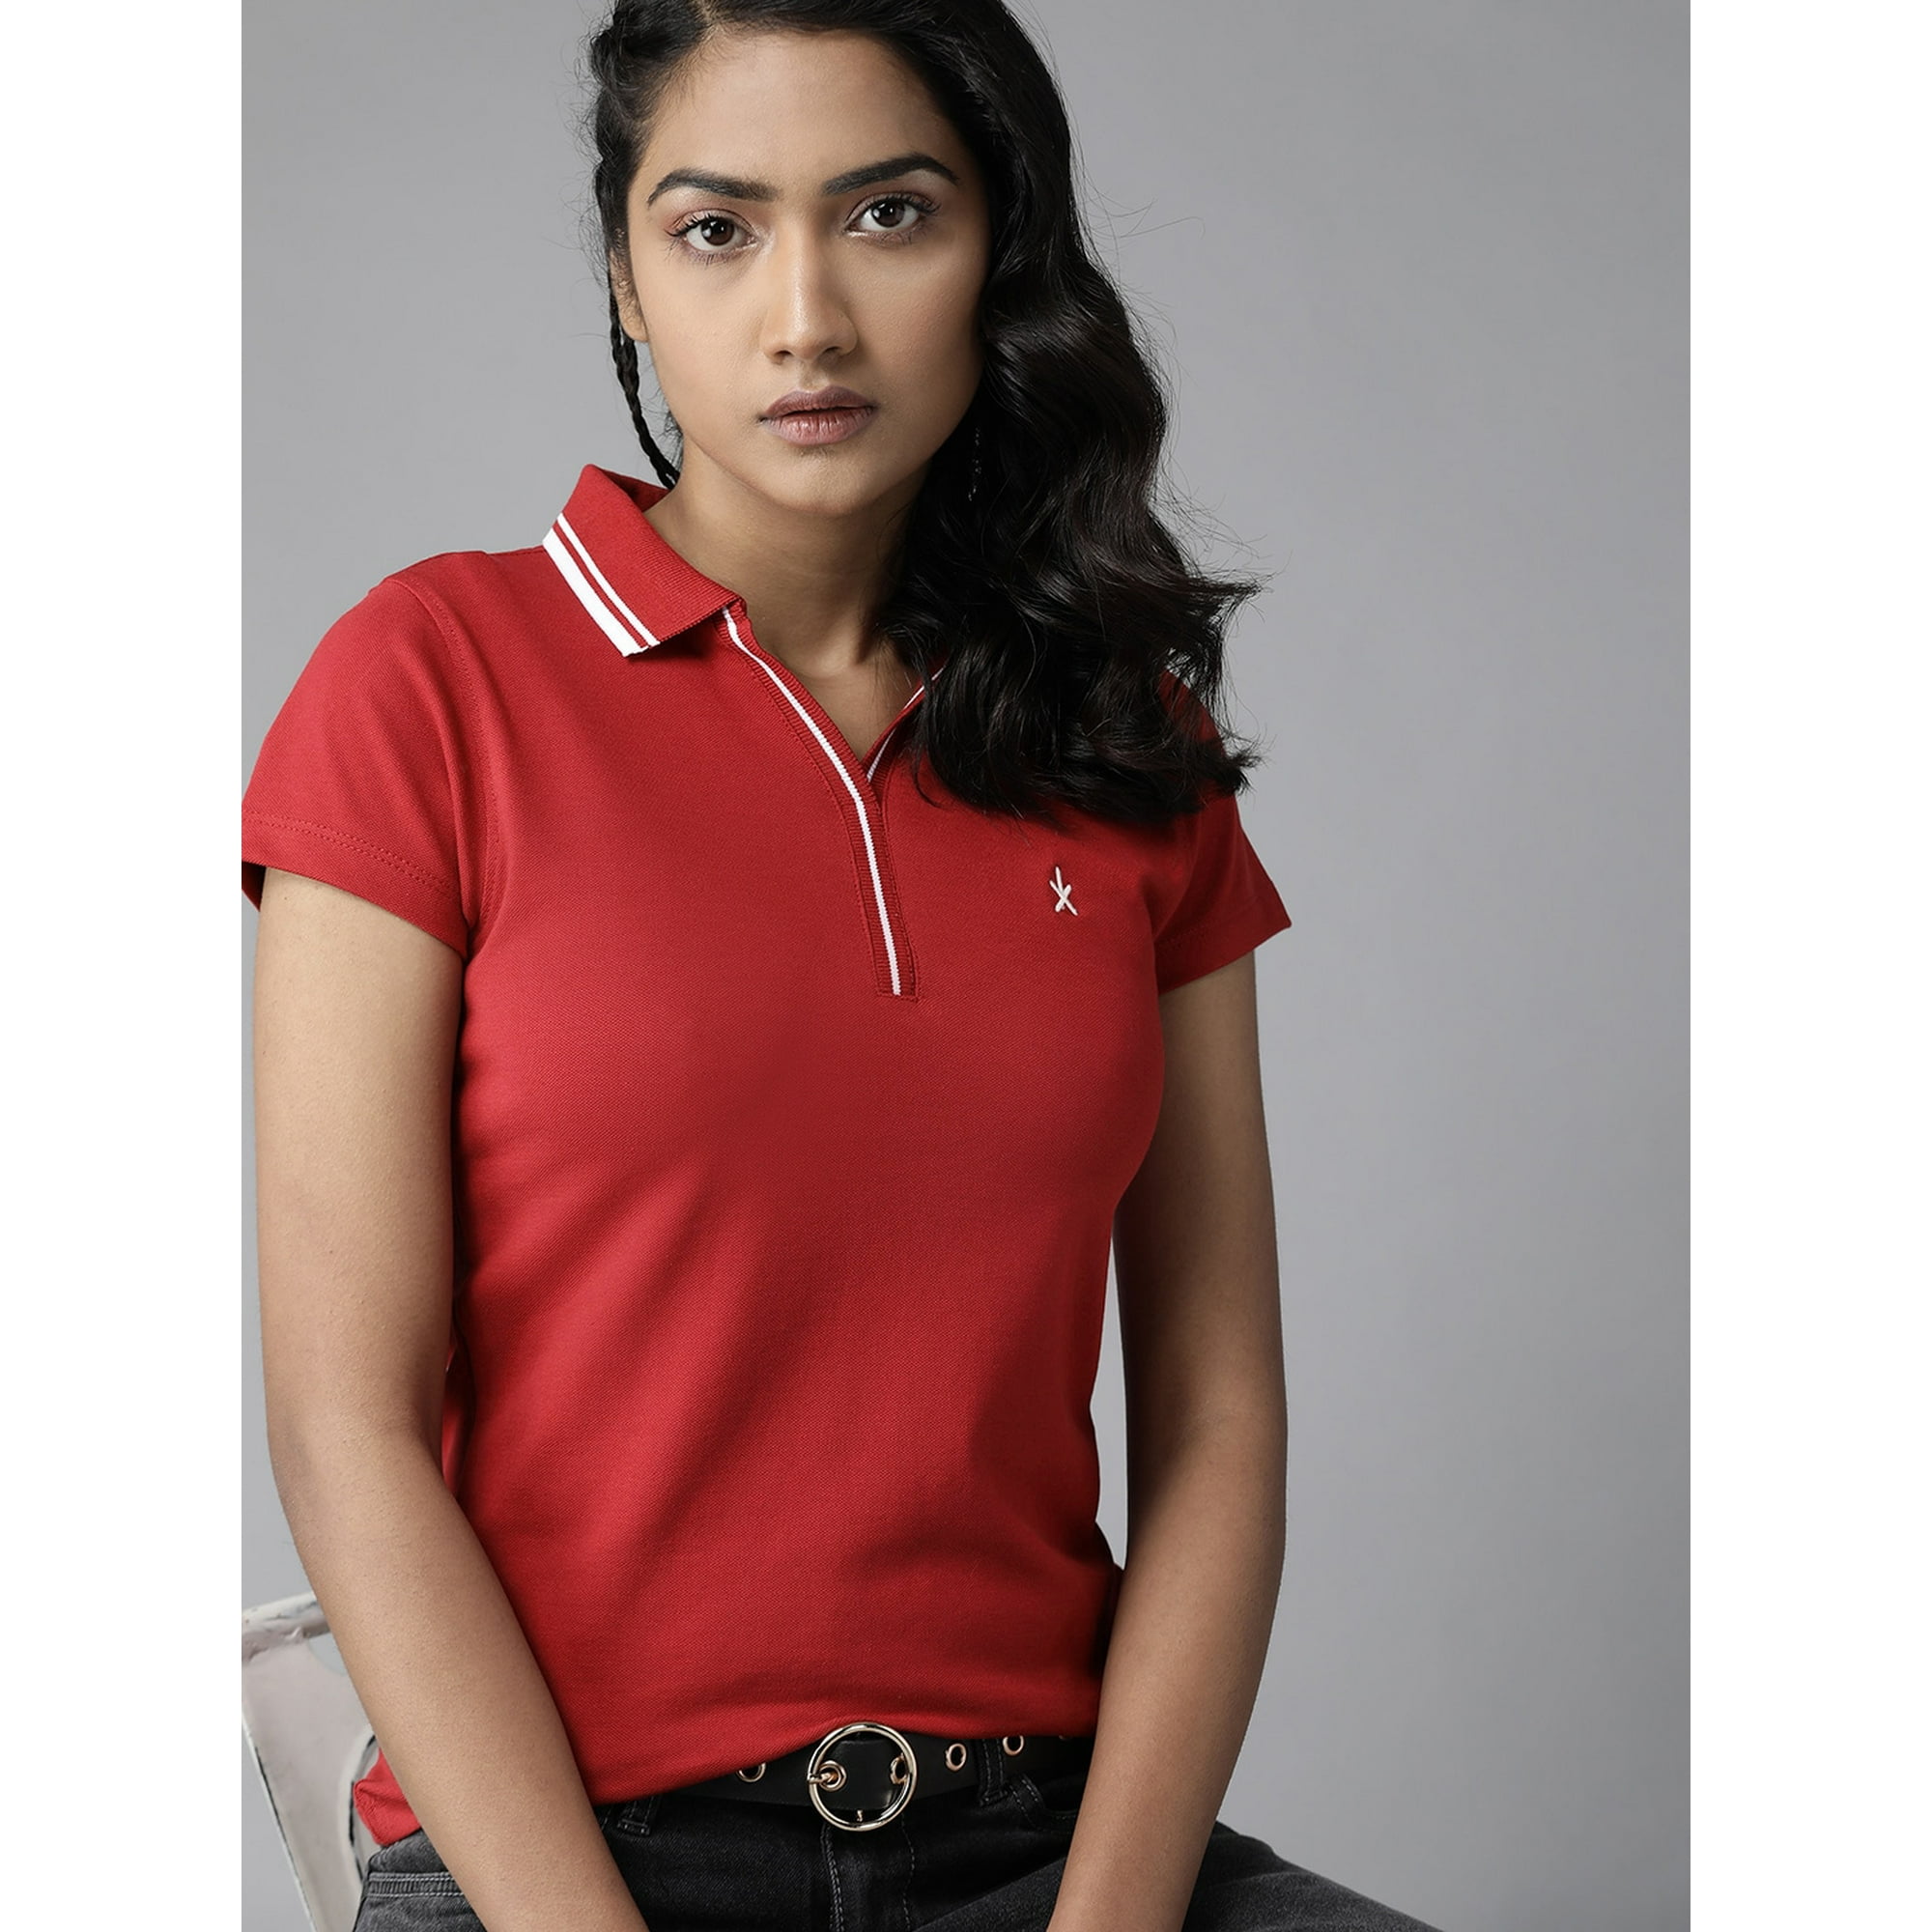 Roadster By Myntra Casual T-Shirts For Women Red Solid Polo, 43% OFF